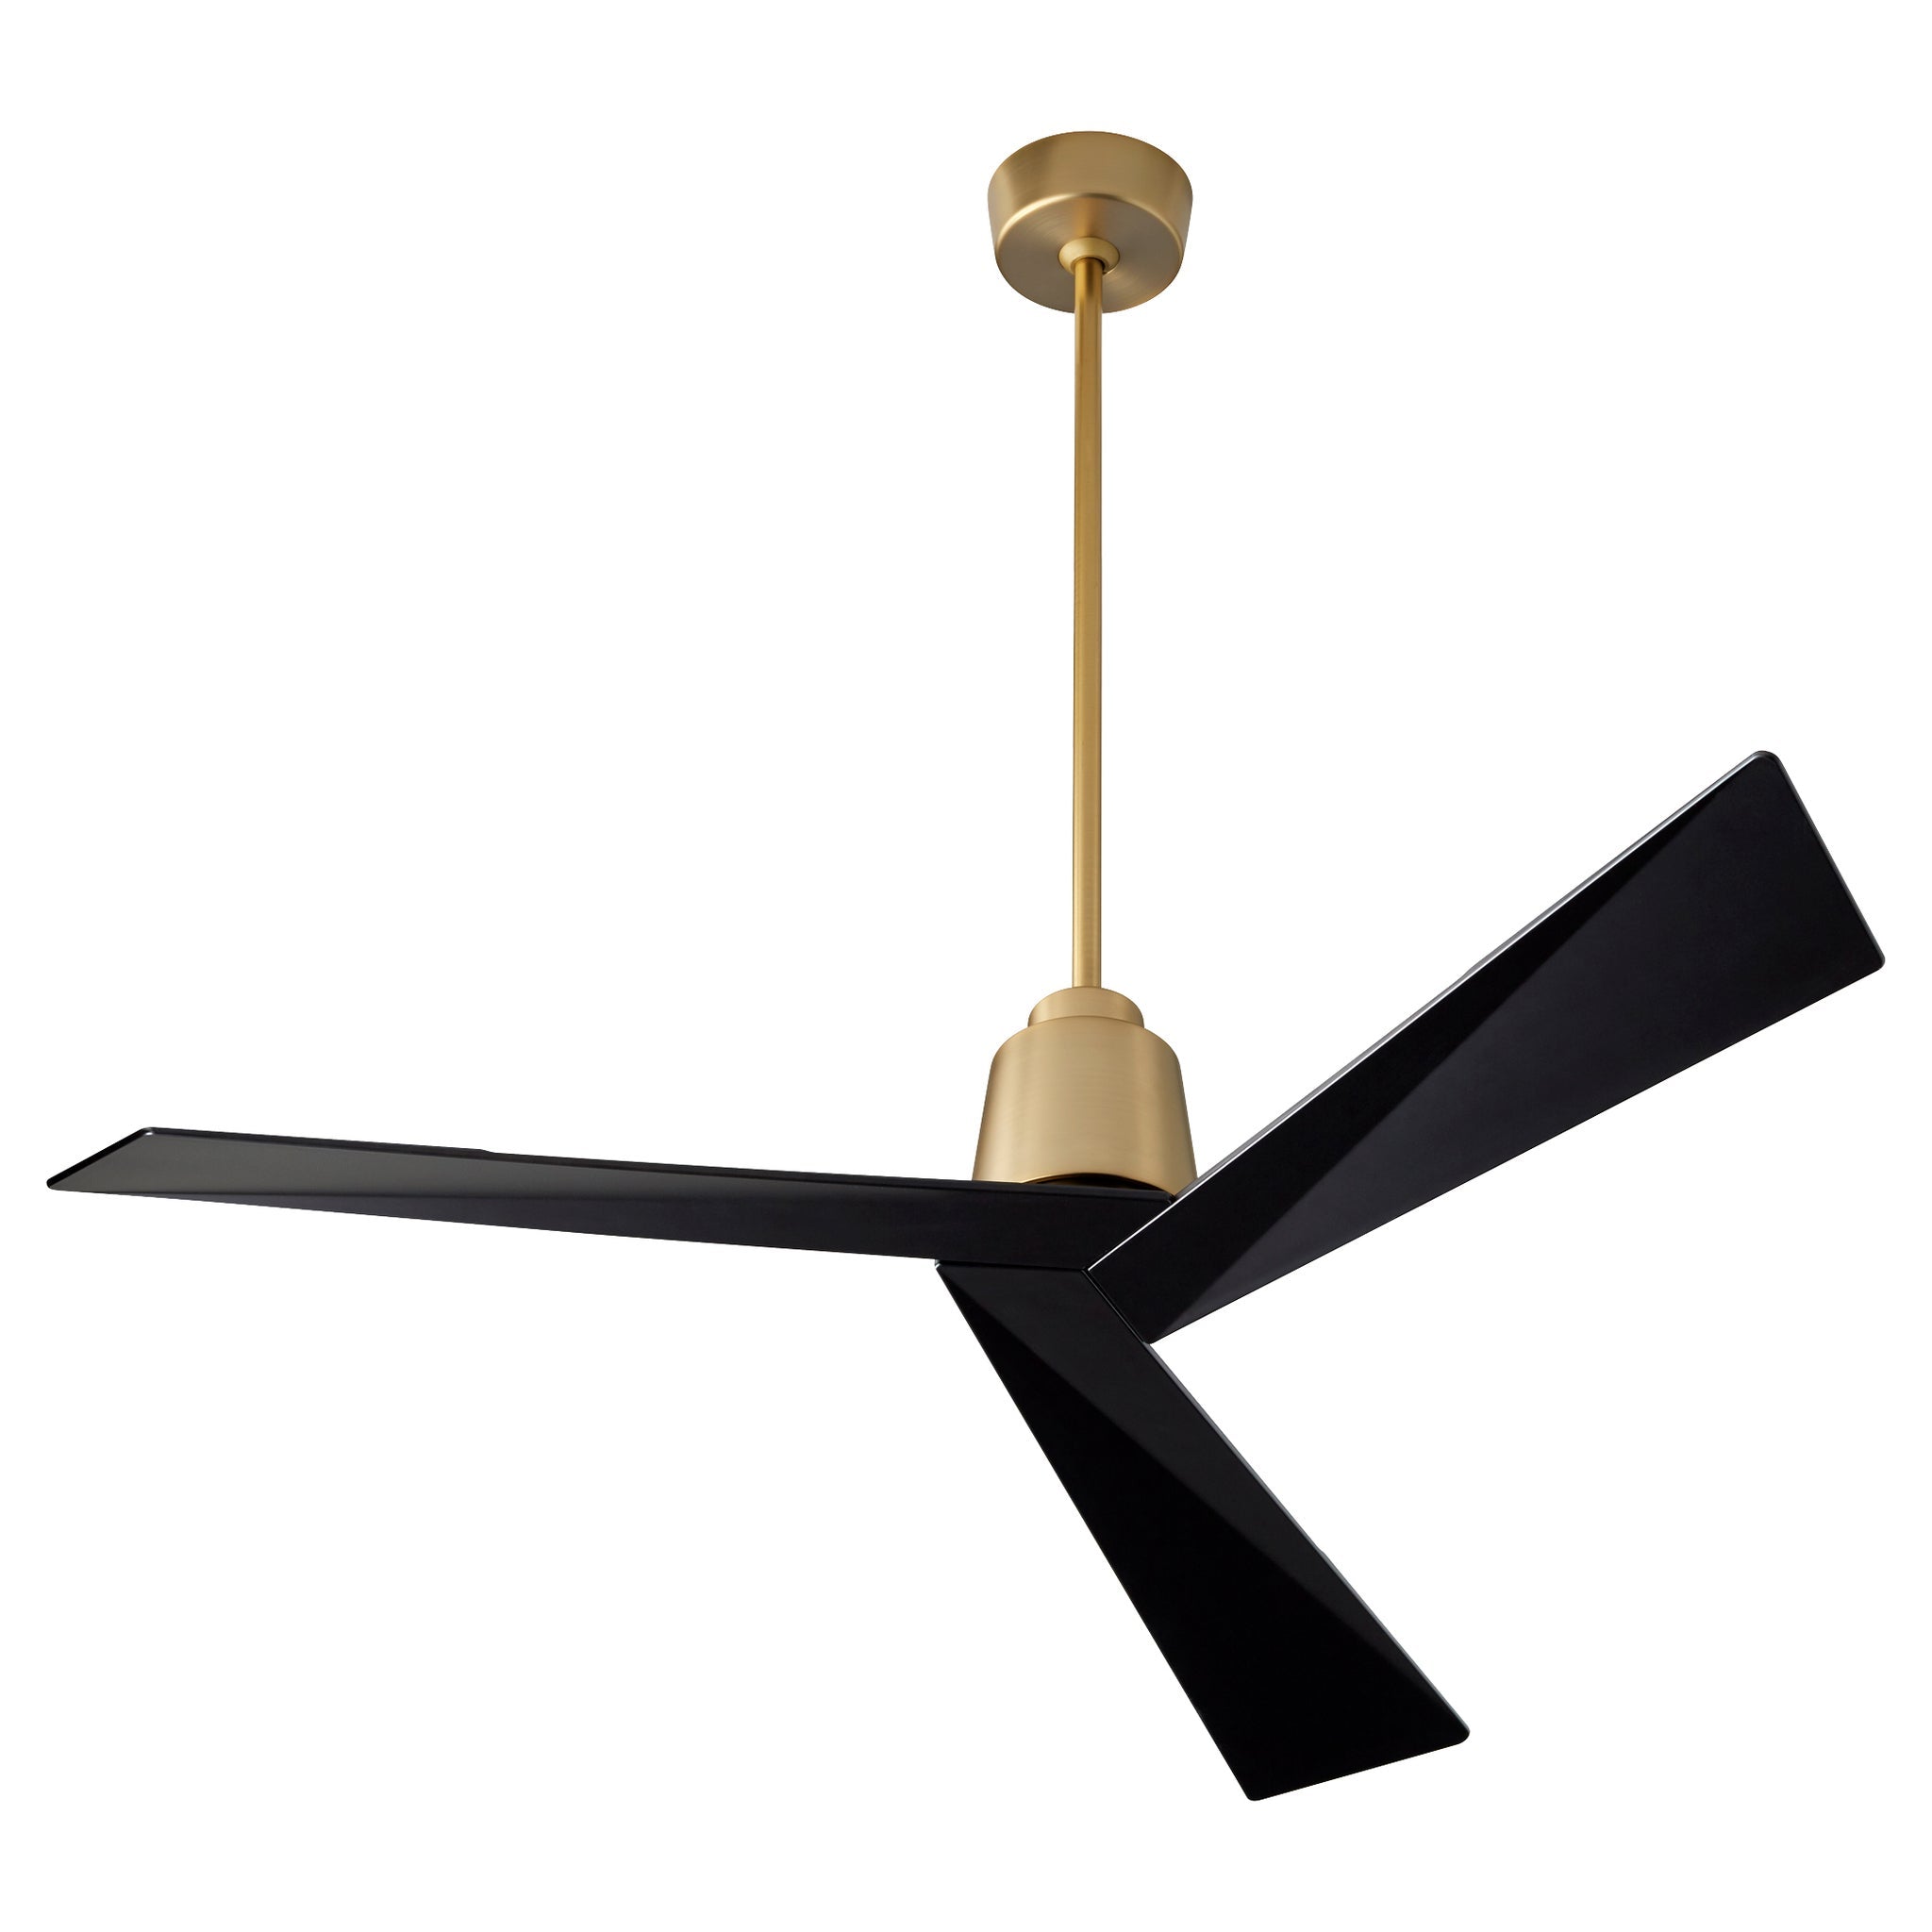 Oxygen DYNAMO 54 Inch Ceiling Fan - Modern, Contemporary - Damp Rated - 6 Speeds - Reversible with Remote